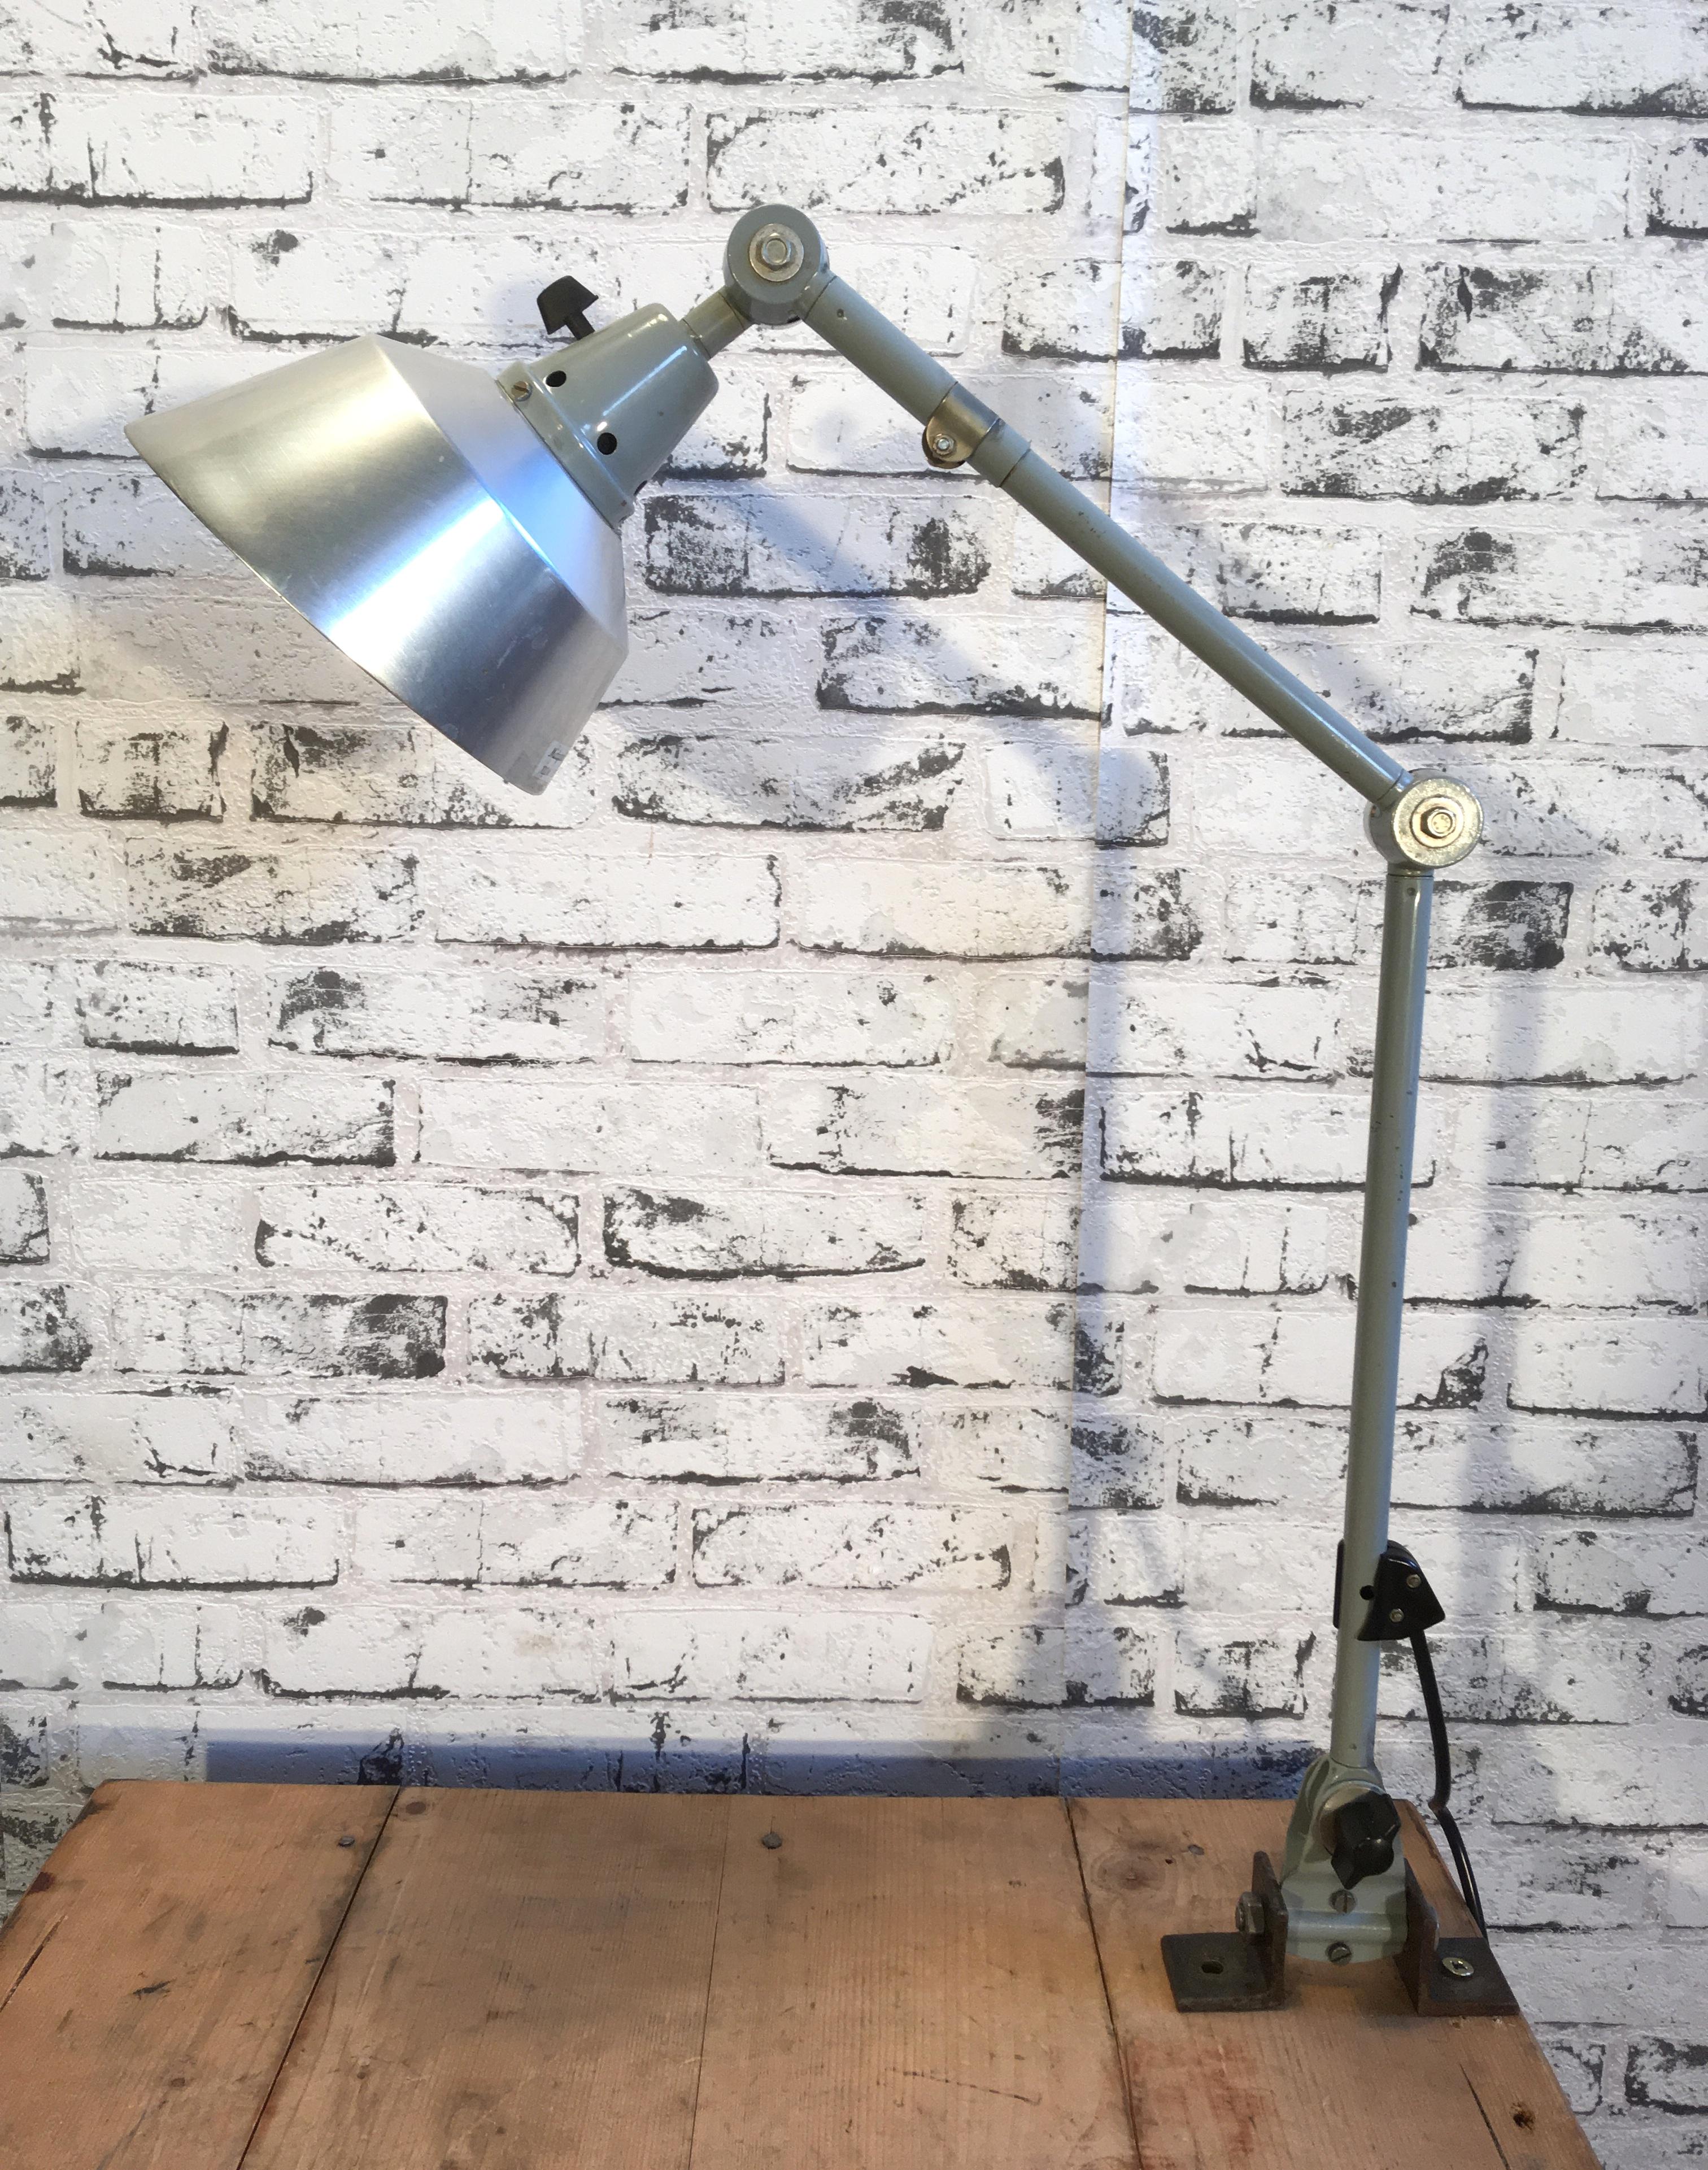 - Lamp produced by Midgard in Germany
- Lamp has three adjustable joints
- The shade is in aluminium
- Grey metal arm
- Switch is situated on the shade
- Features a E27 socket
- Fully functional
- Good vintage condition.